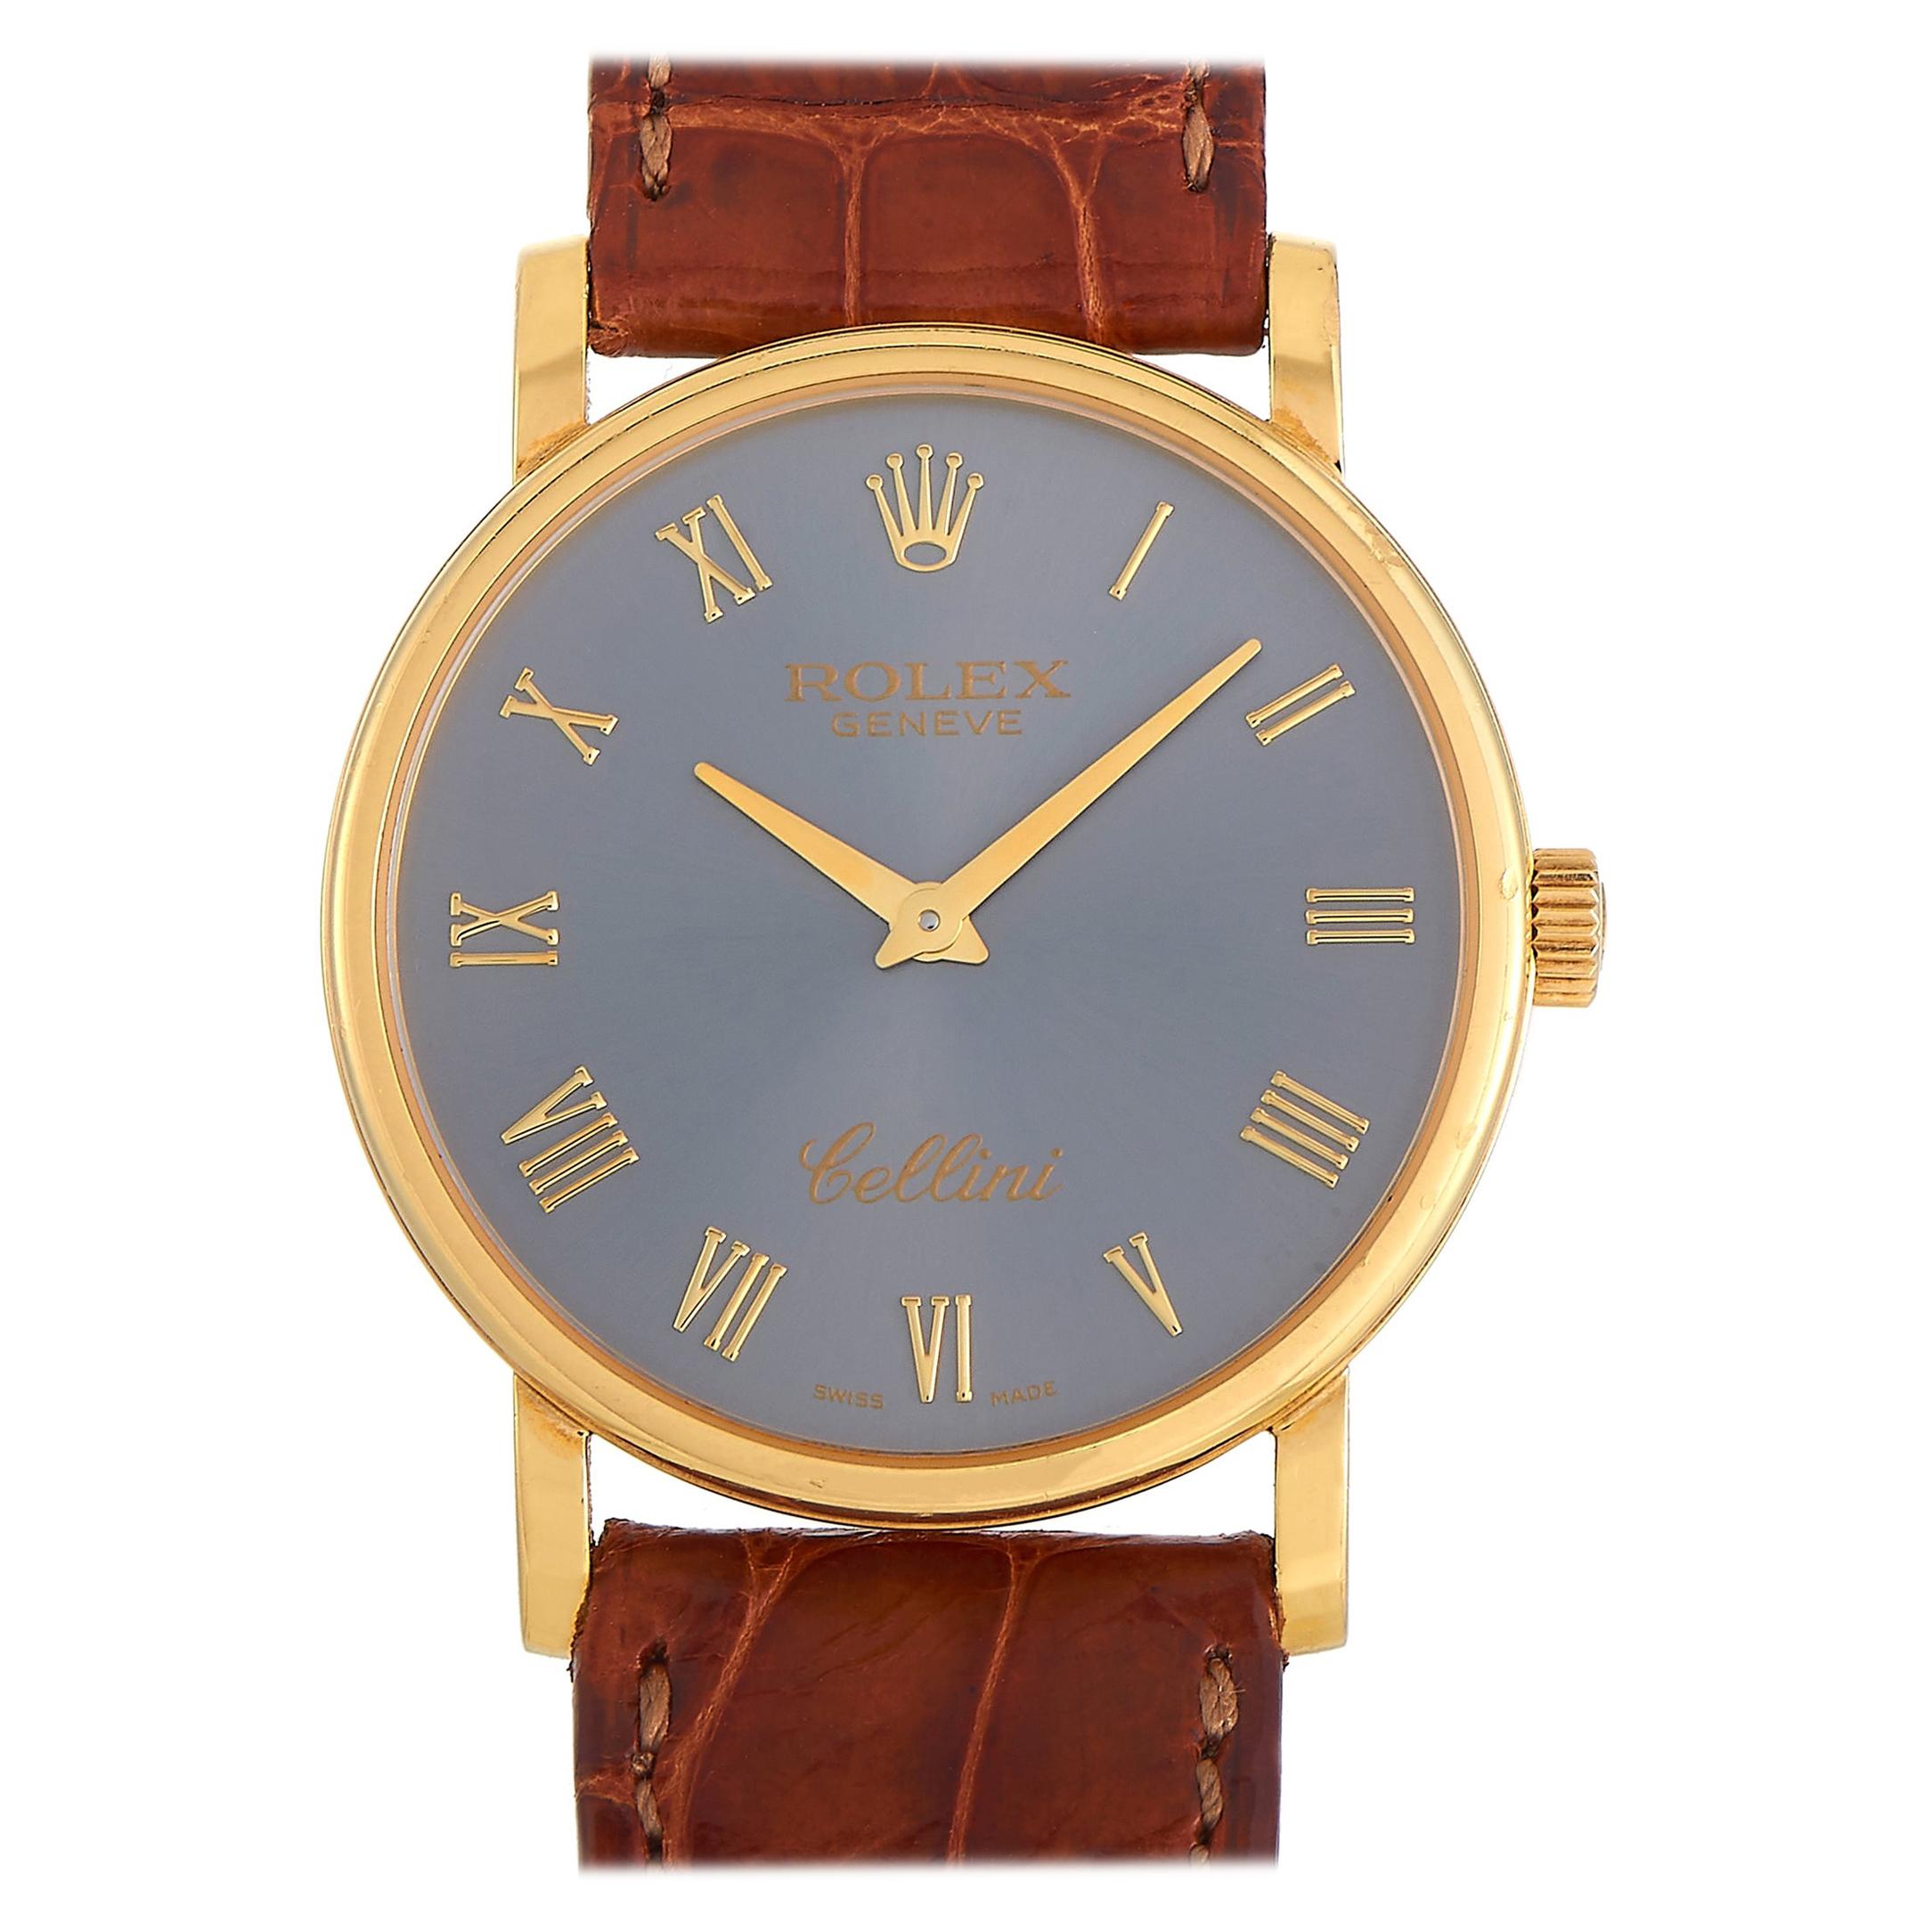 Rolex Cellini 18K Yellow Gold Slate Watch 5115/8 at 1stDibs | rolex cellini  18k gold watch, rolex cellini 5115/8, rolex 5115/8